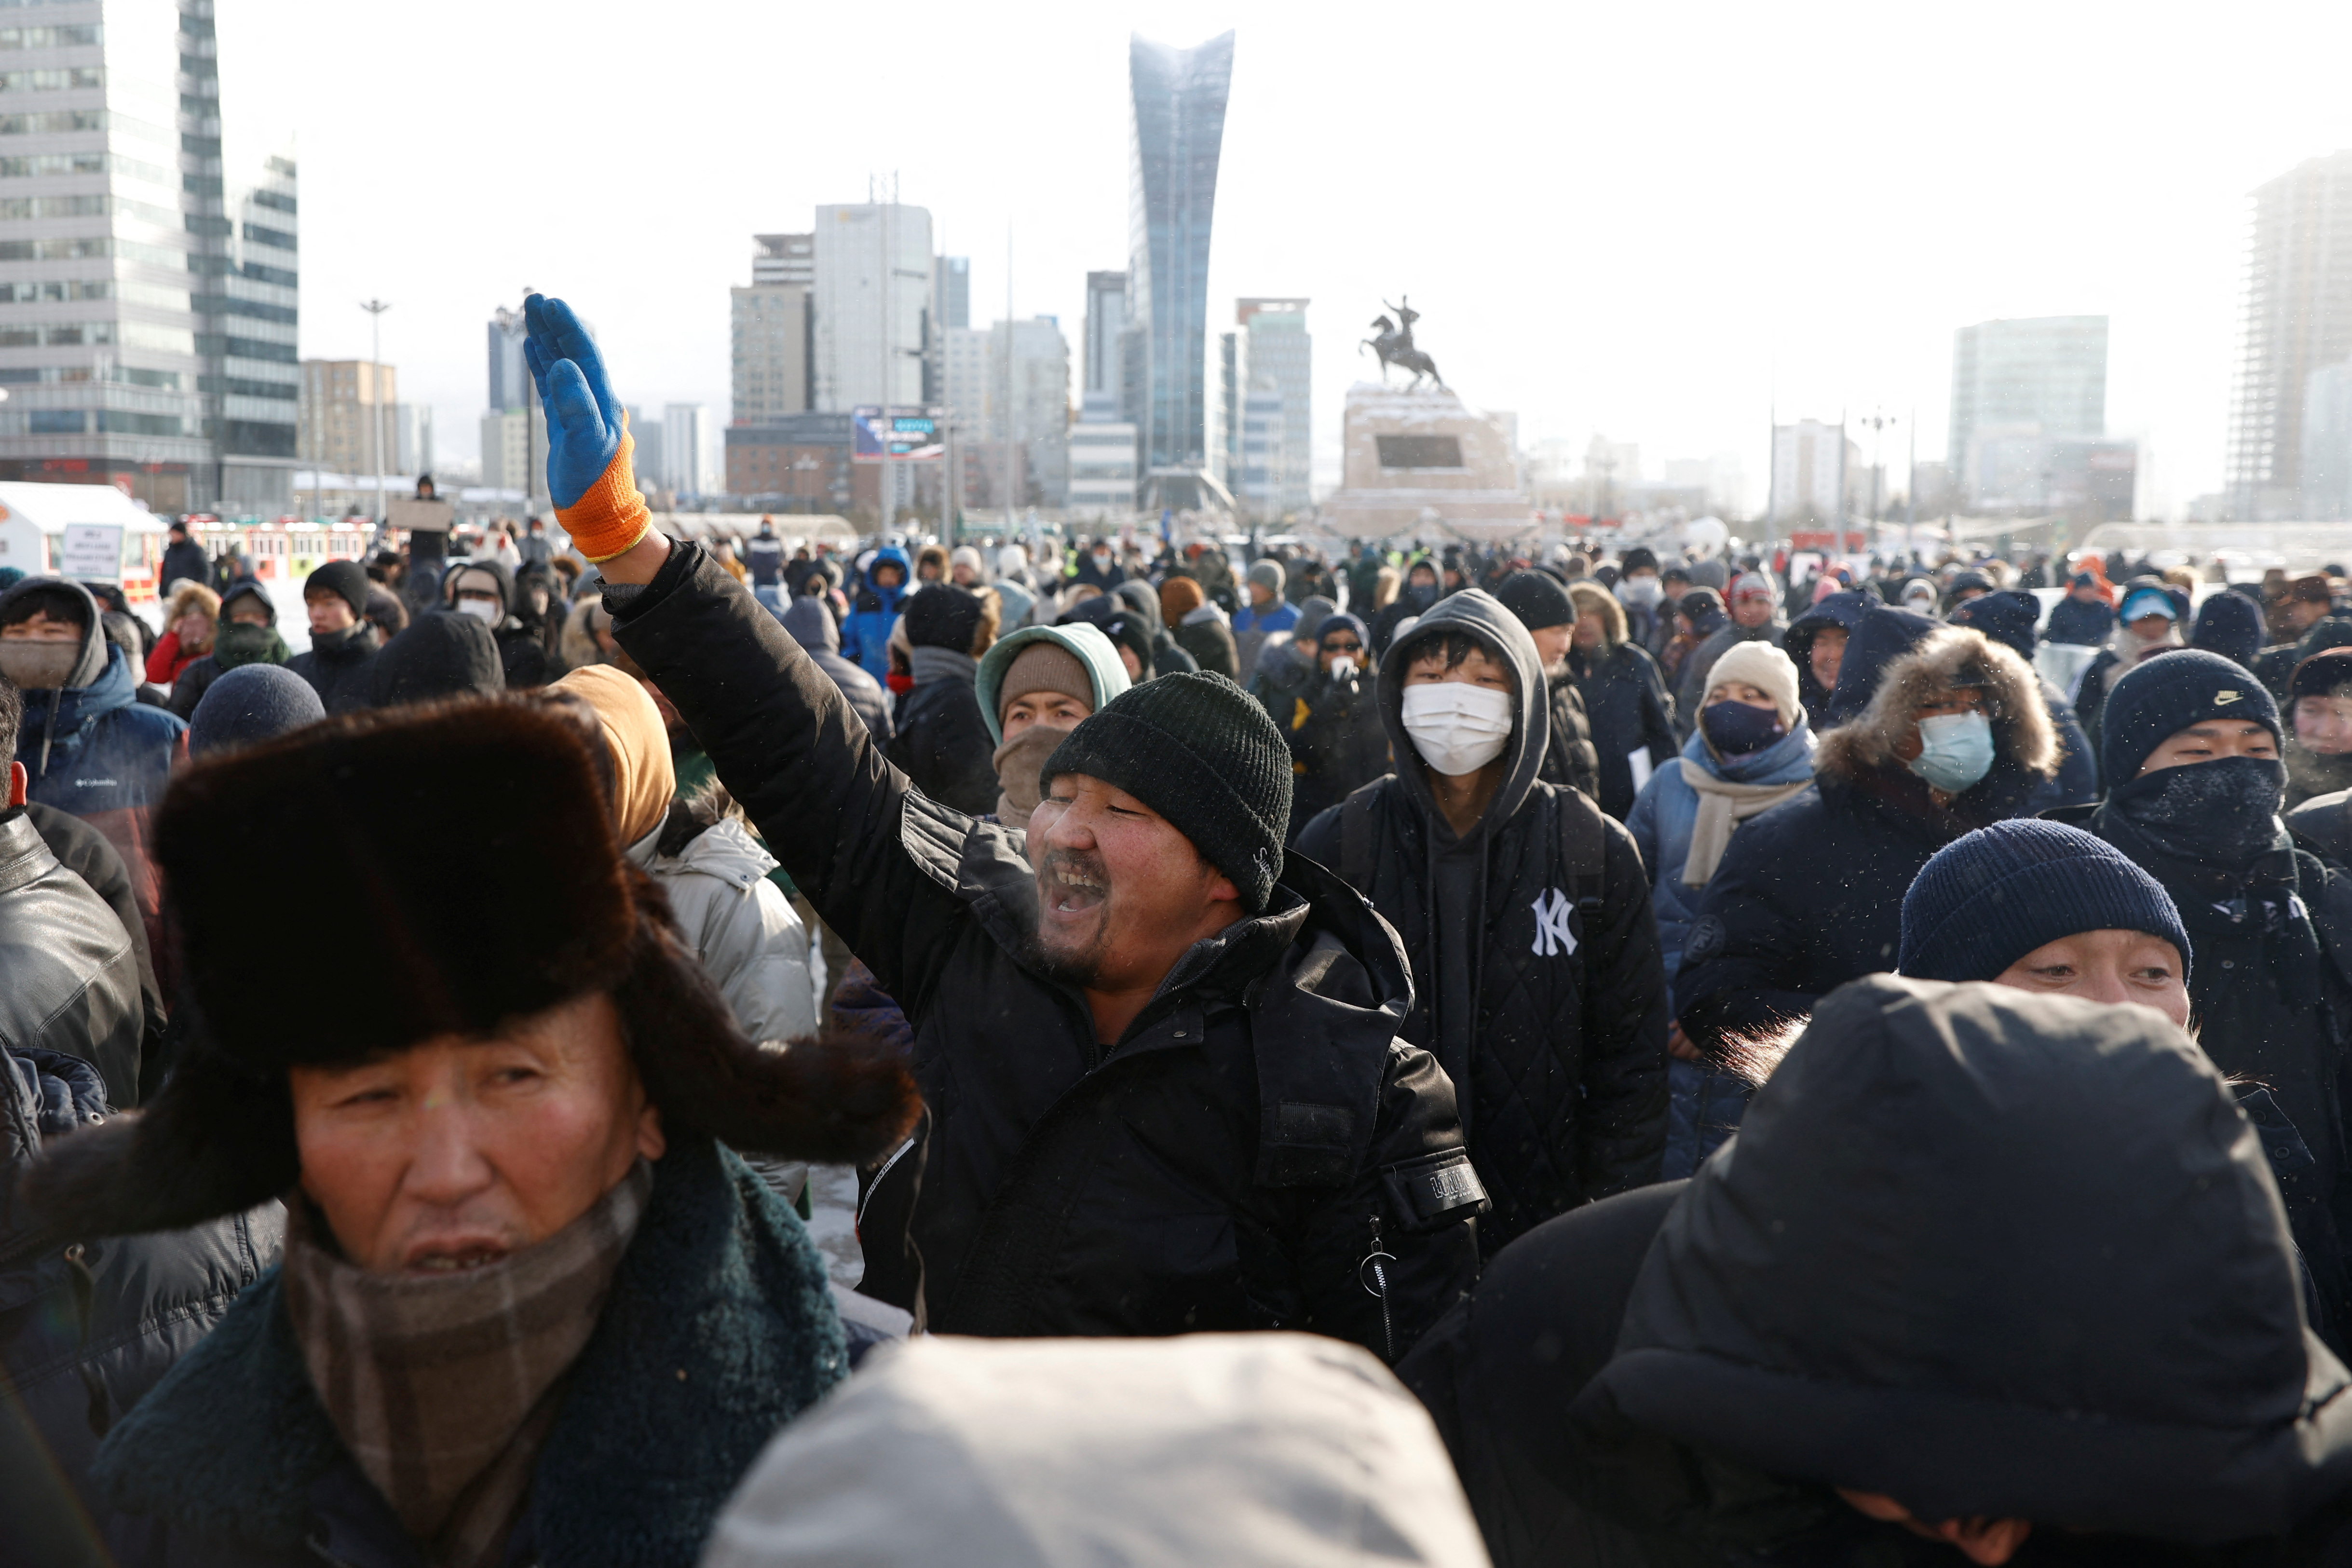 People take part in a demonstration against government corruption at Sukhbaatar Square in Ulaanbaatar